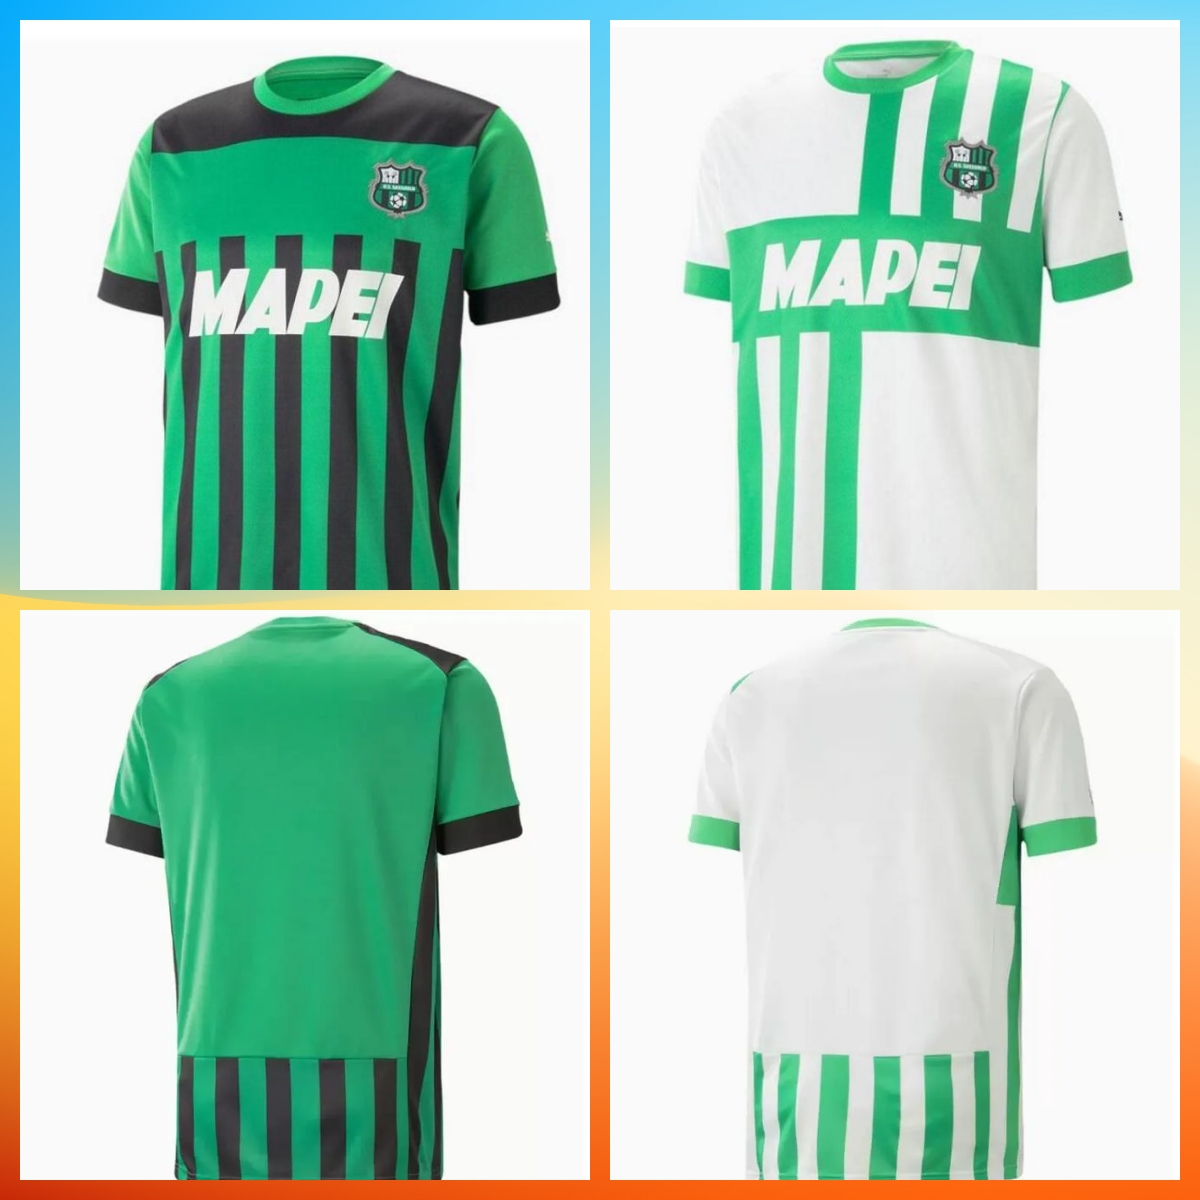 

22 23 SASSUOLO 100th top thai quality soccer jerseys home away 100 Centenary years 2022 2023 jersey football shirts top quality, 03